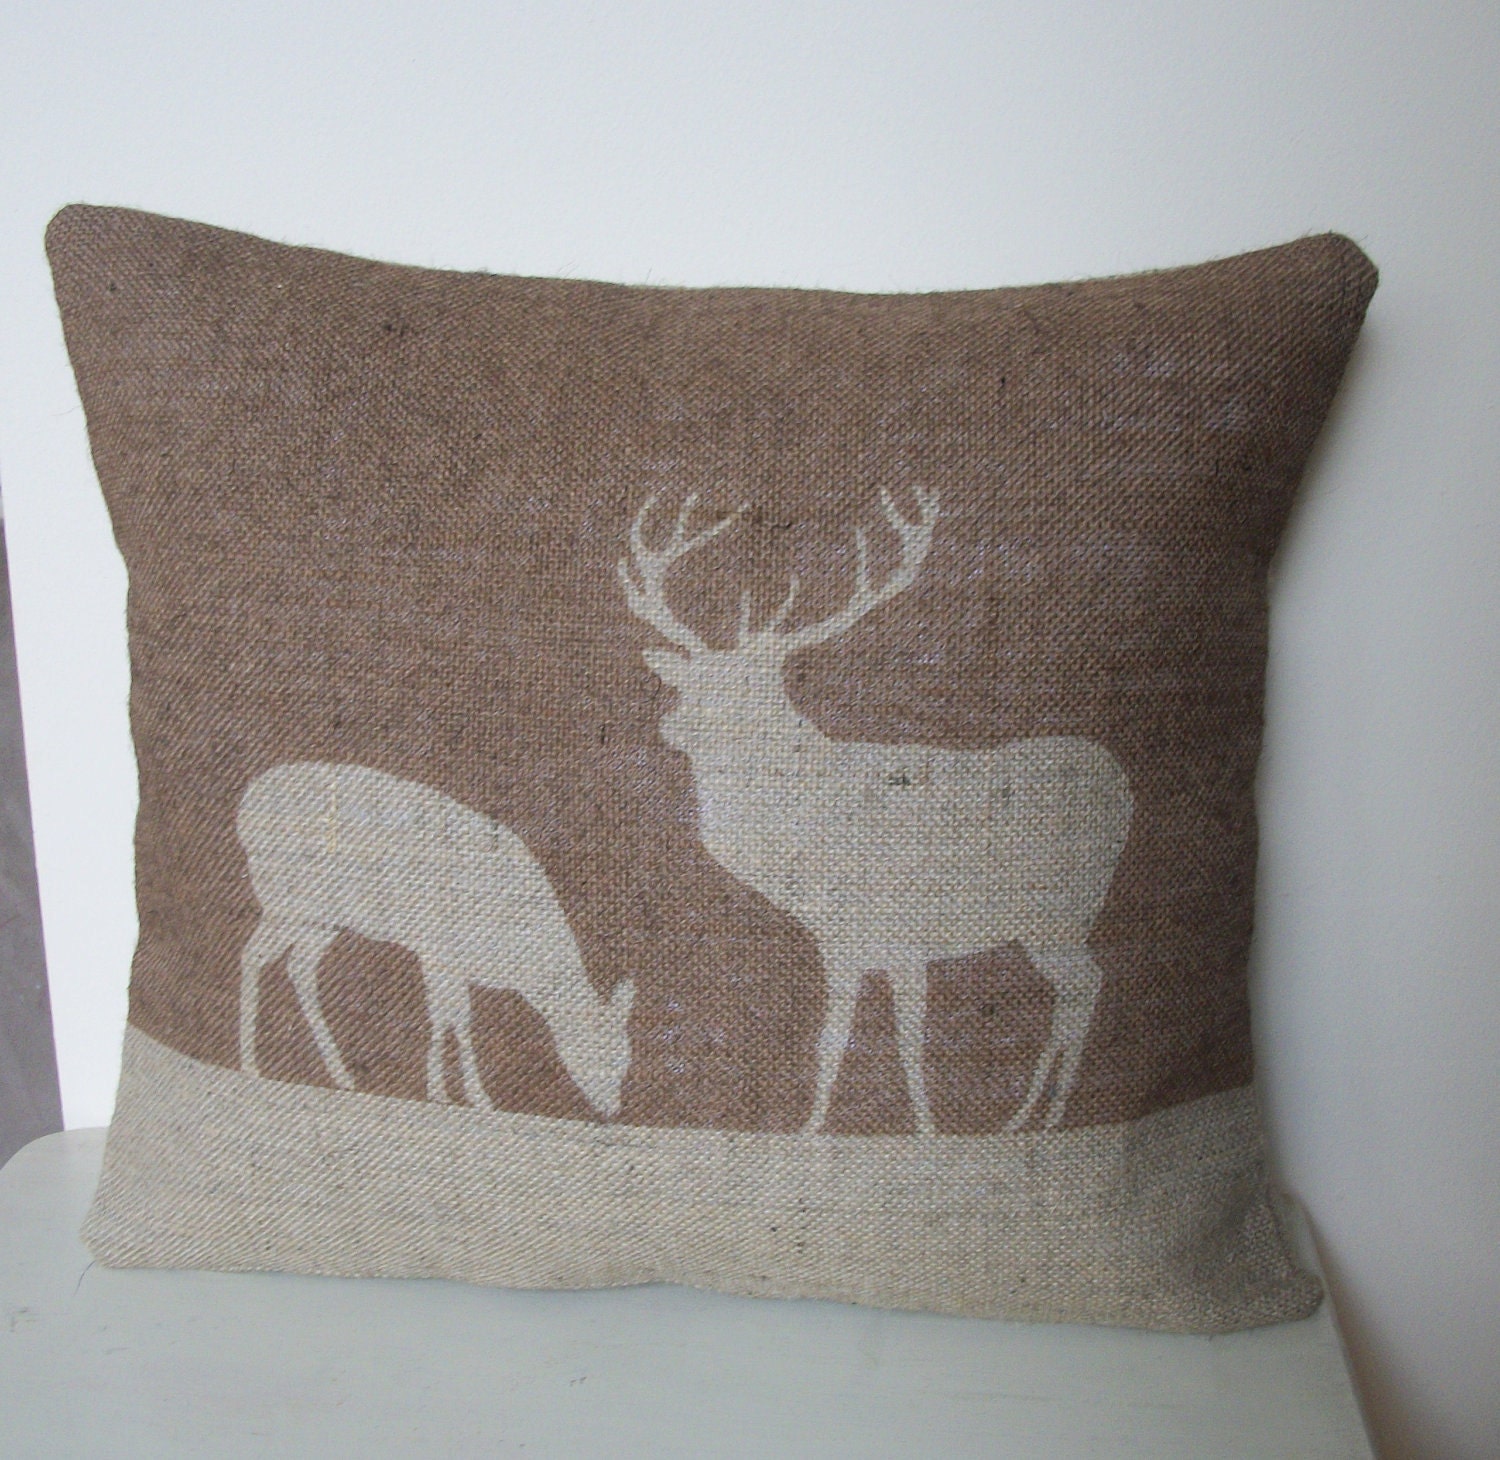 20% OFF SALE - Stag & Deer Hessian Cushion in Chestnut Brown 14" x 16"